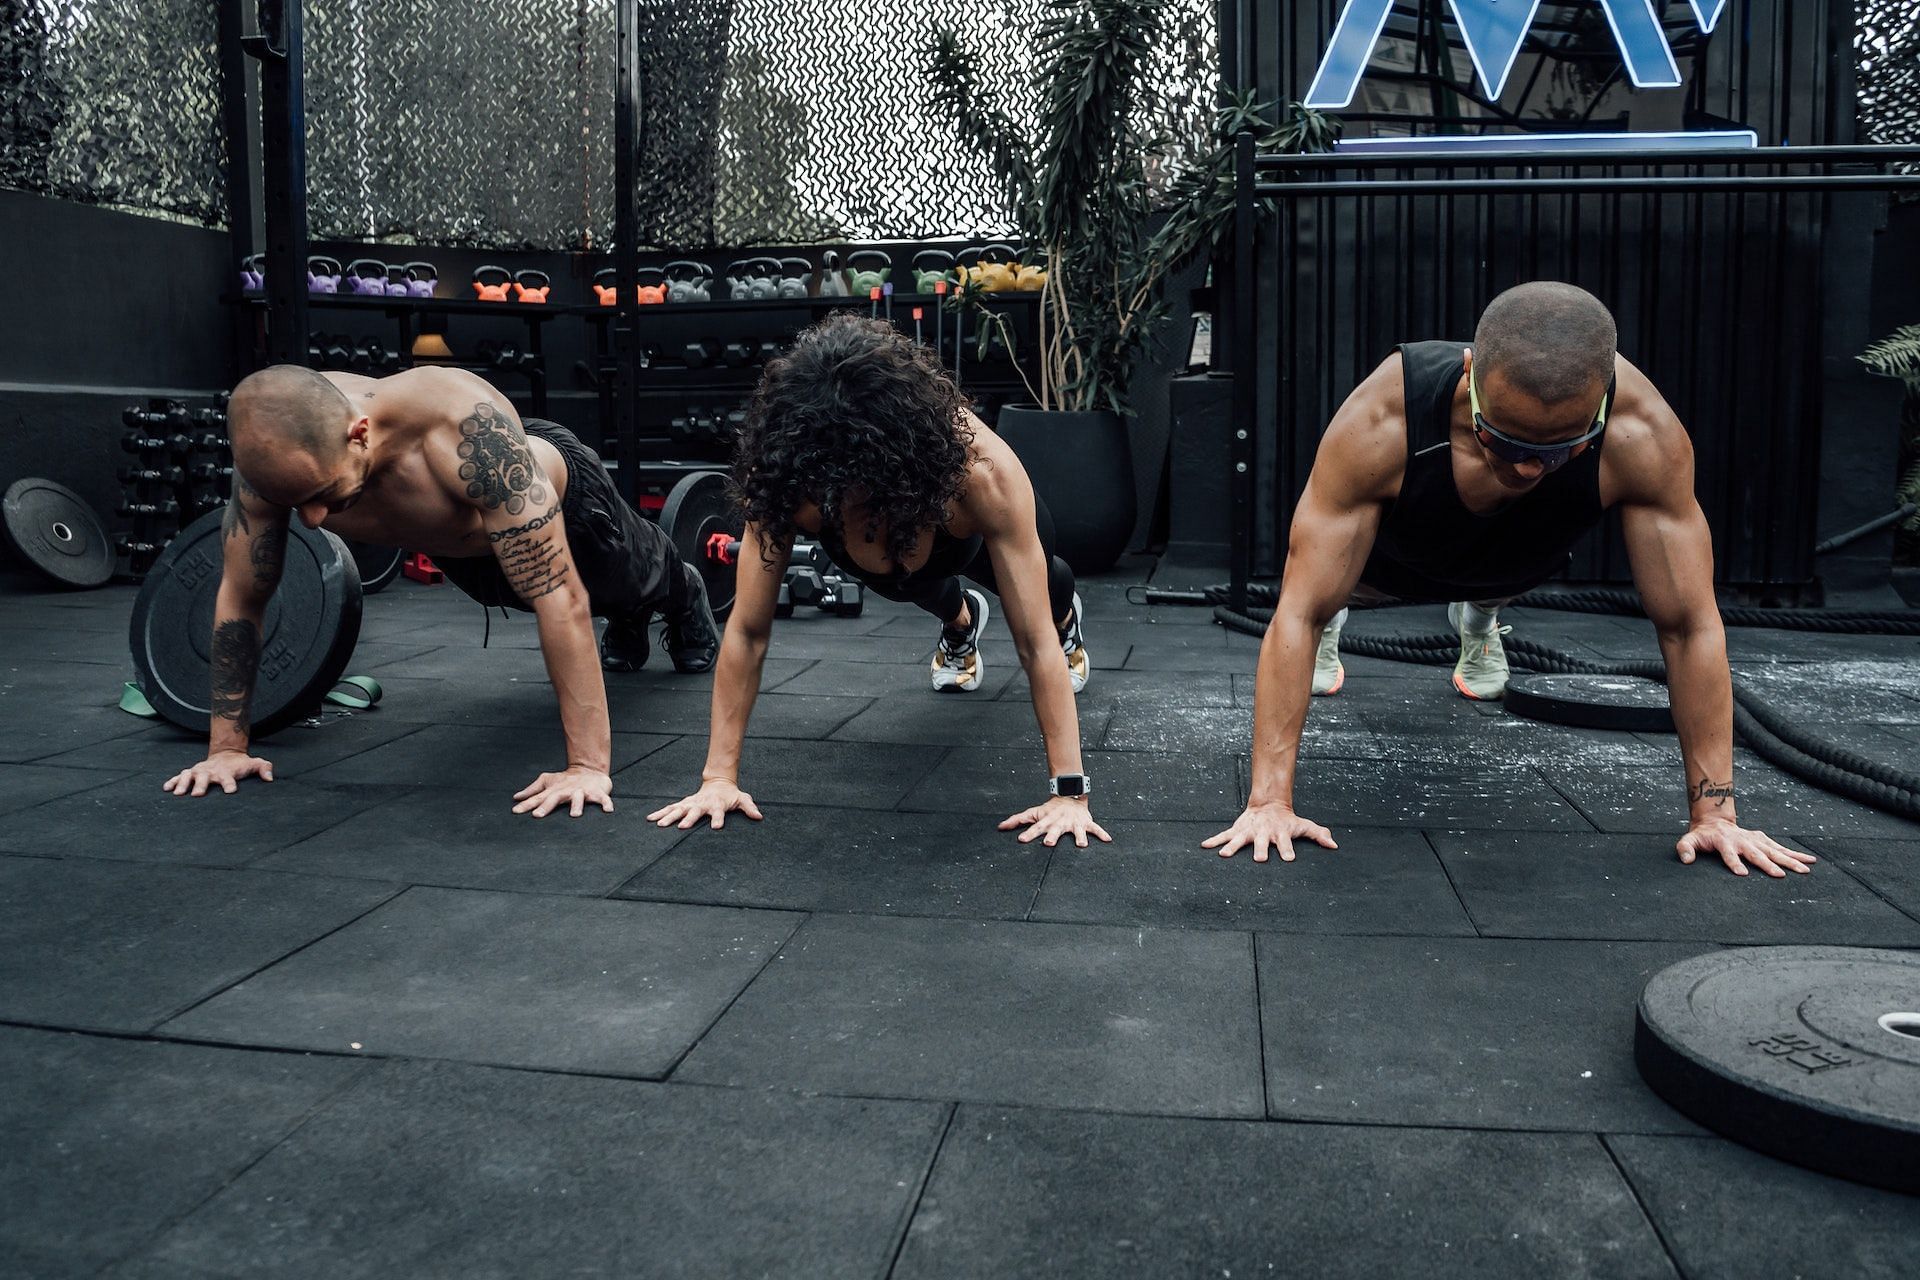 Burpee exercise: Reasons to add it to your workout routine